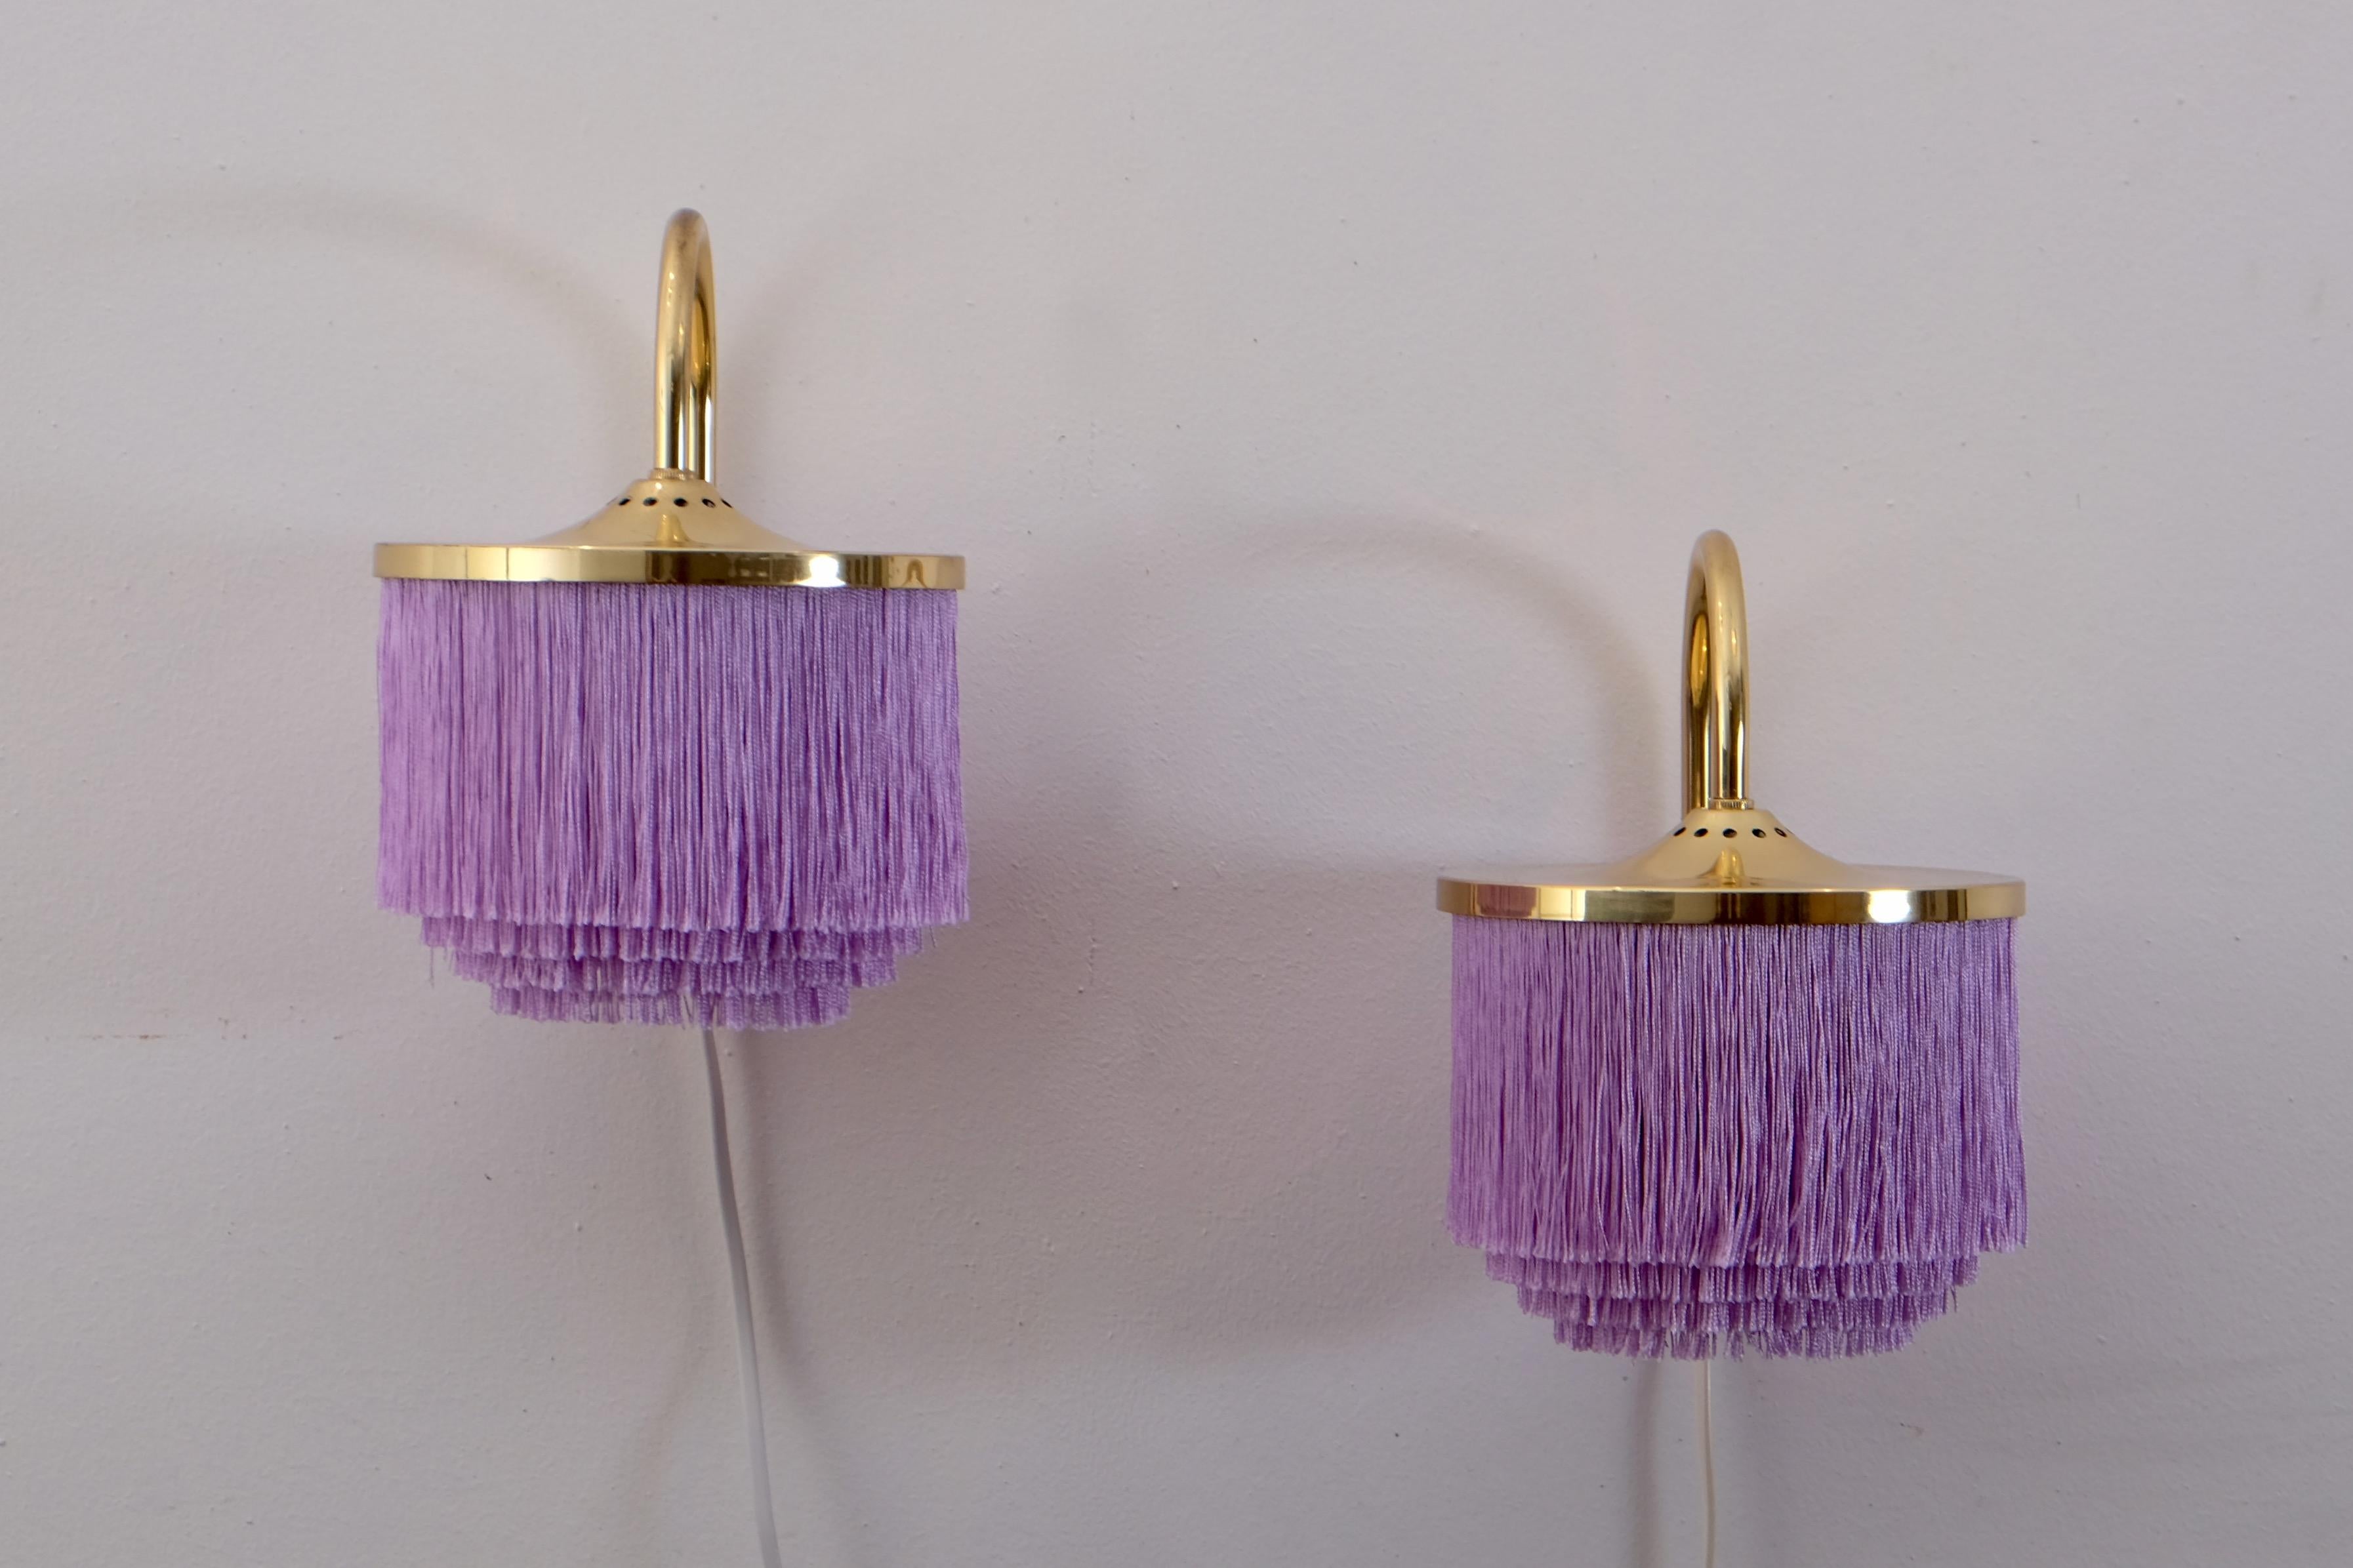 Set of 4 available. Swedish purple fringes wall light model V271 designed by Hans-Agne Jakobsson, produced in Markaryd, Sweden, 1960s.
Listed price is for a pair.

Measures: Diameter 16.5 cm
Distance from wall 19.5 cm
Top of arm to bottom of